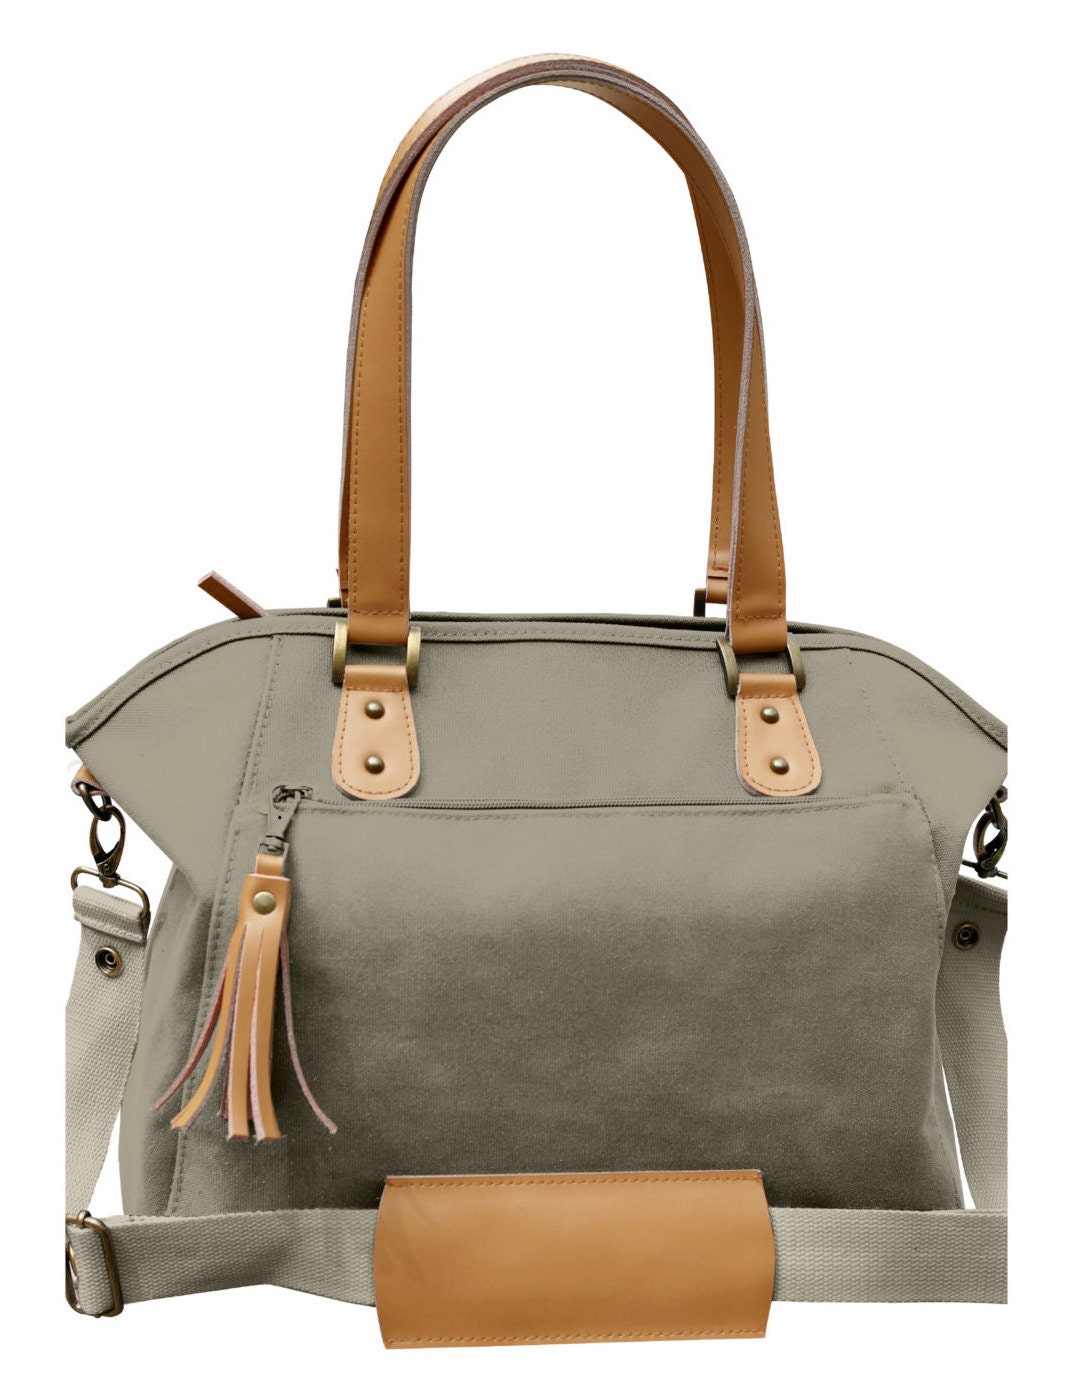 Sturdy Canvas Diaper Bag Taupe Canvas Leather Tote Diaper